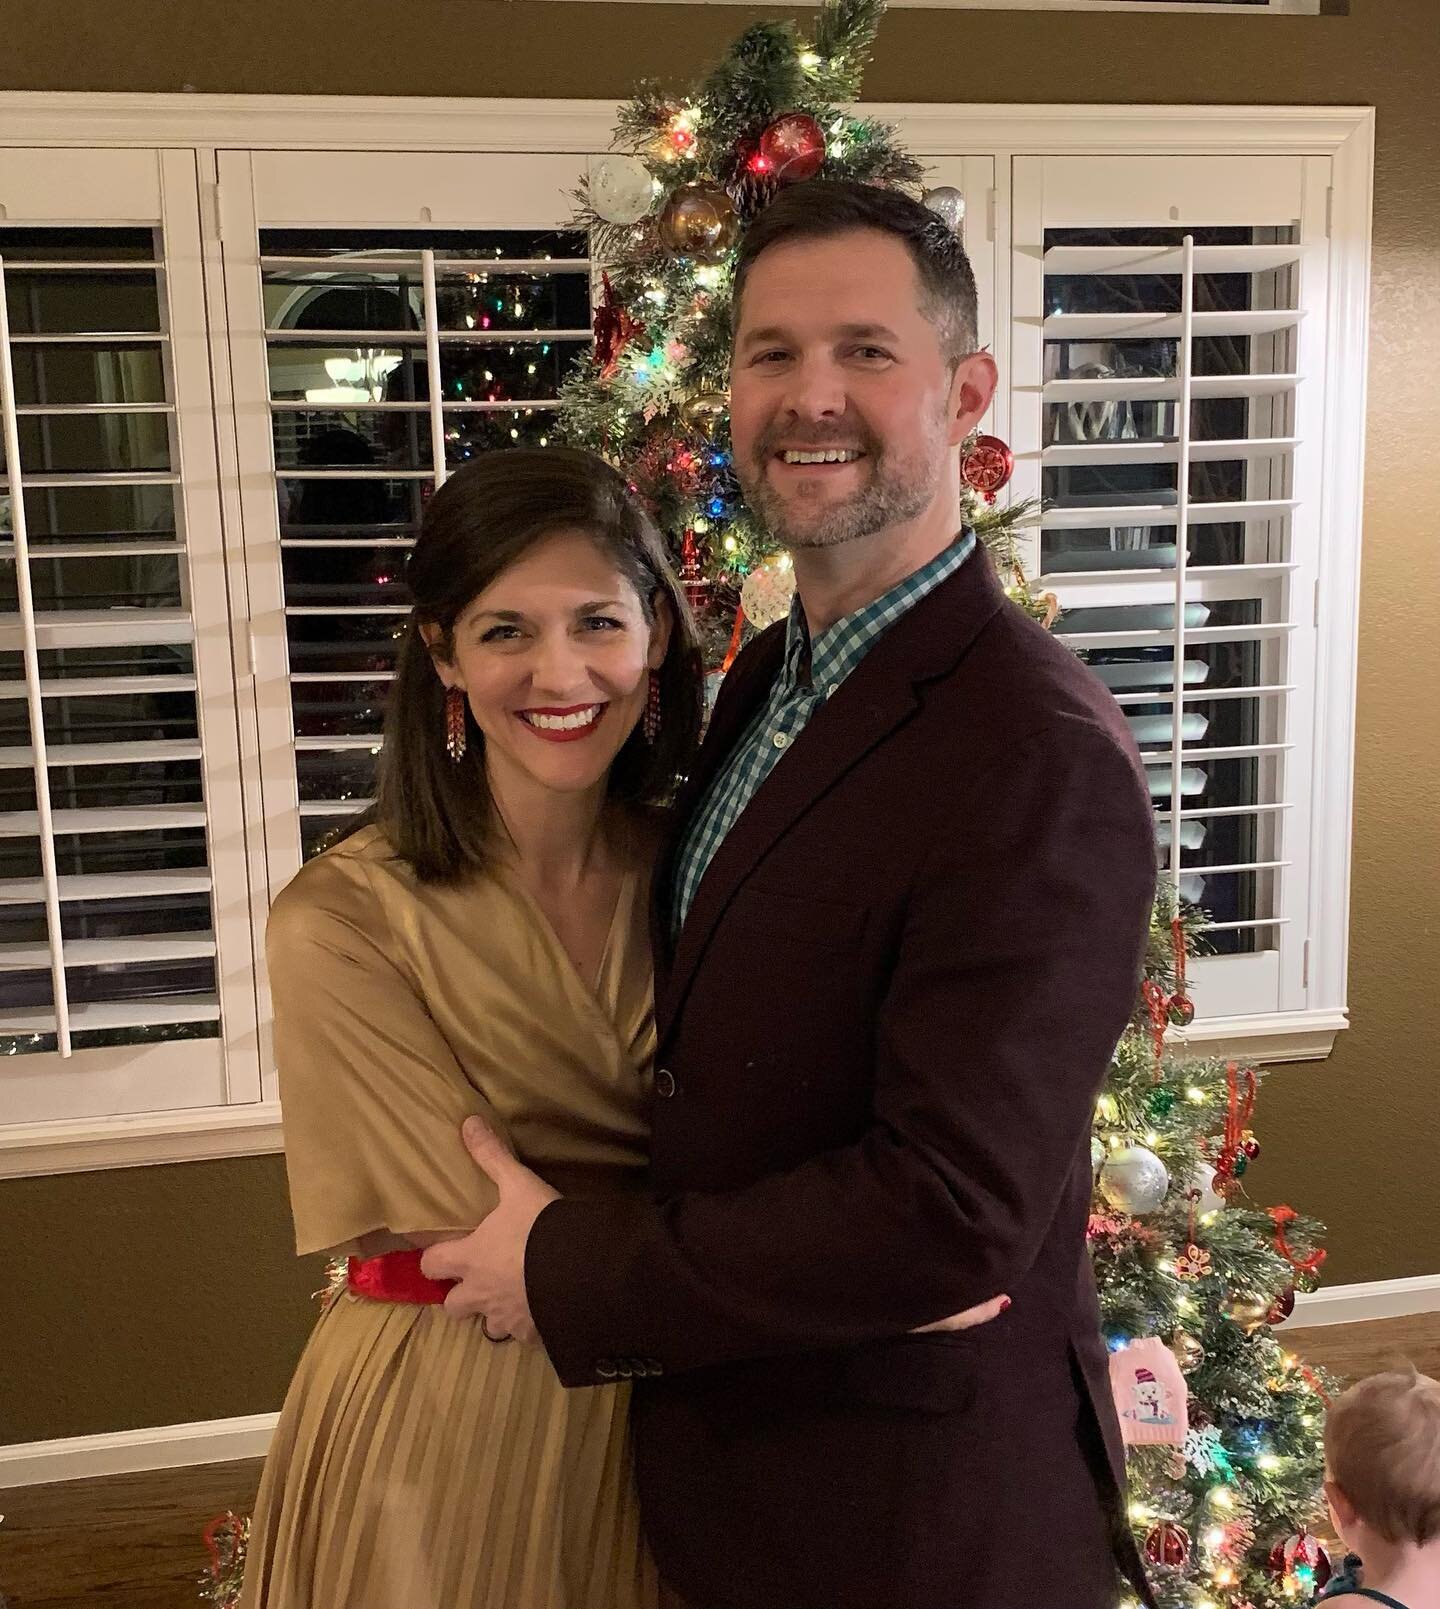 He appeared and the soul felt it&rsquo;s worth! I&rsquo;ll never get over that line. Jesus arrived on the scene and the soul, which had forgotten it&rsquo;s eternal worth, suddenly remembered!! Amazing! 

Merry Christmas from our family to yours!